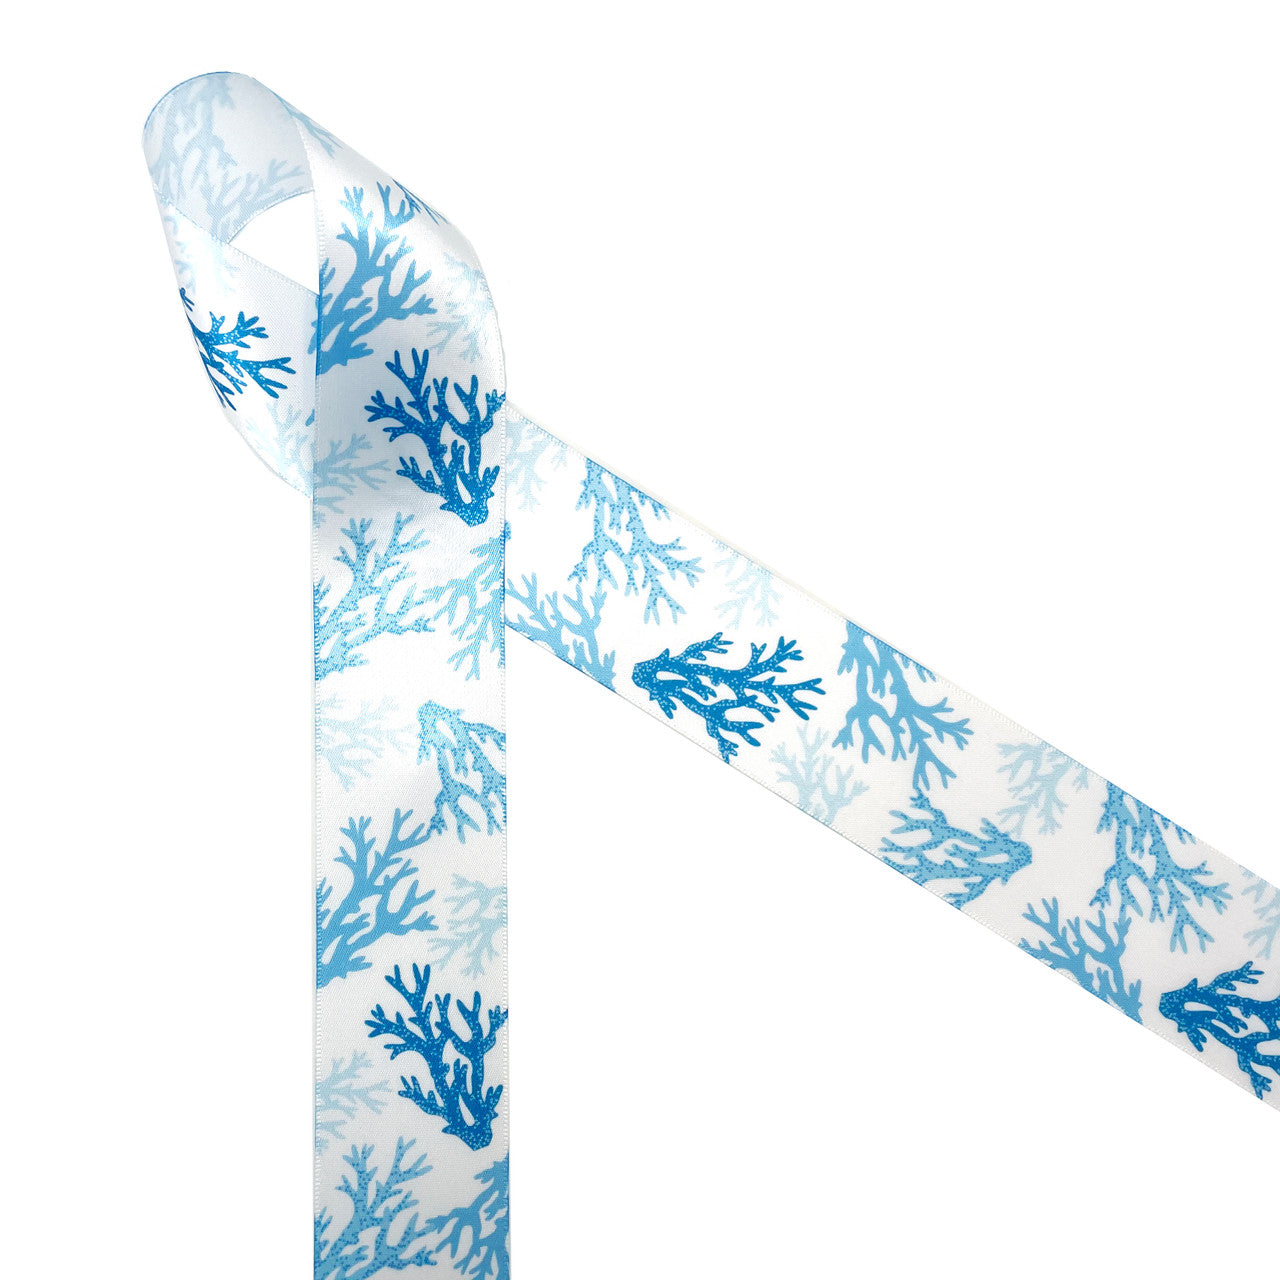 Coral Reef  patterns are trending in home decor and fashion! Our coral reef ribbon in shades of blue printed on 1.5" white single face satin is perfect for any beach, tropical or reef themed event! This is the perfect ribbon for tying gifts for a tropical themed wedding or bridal shower! Be sure to have this beautiful ribbon on hand for all you Summer crafting! Our ribbon is designed and printed in the USA